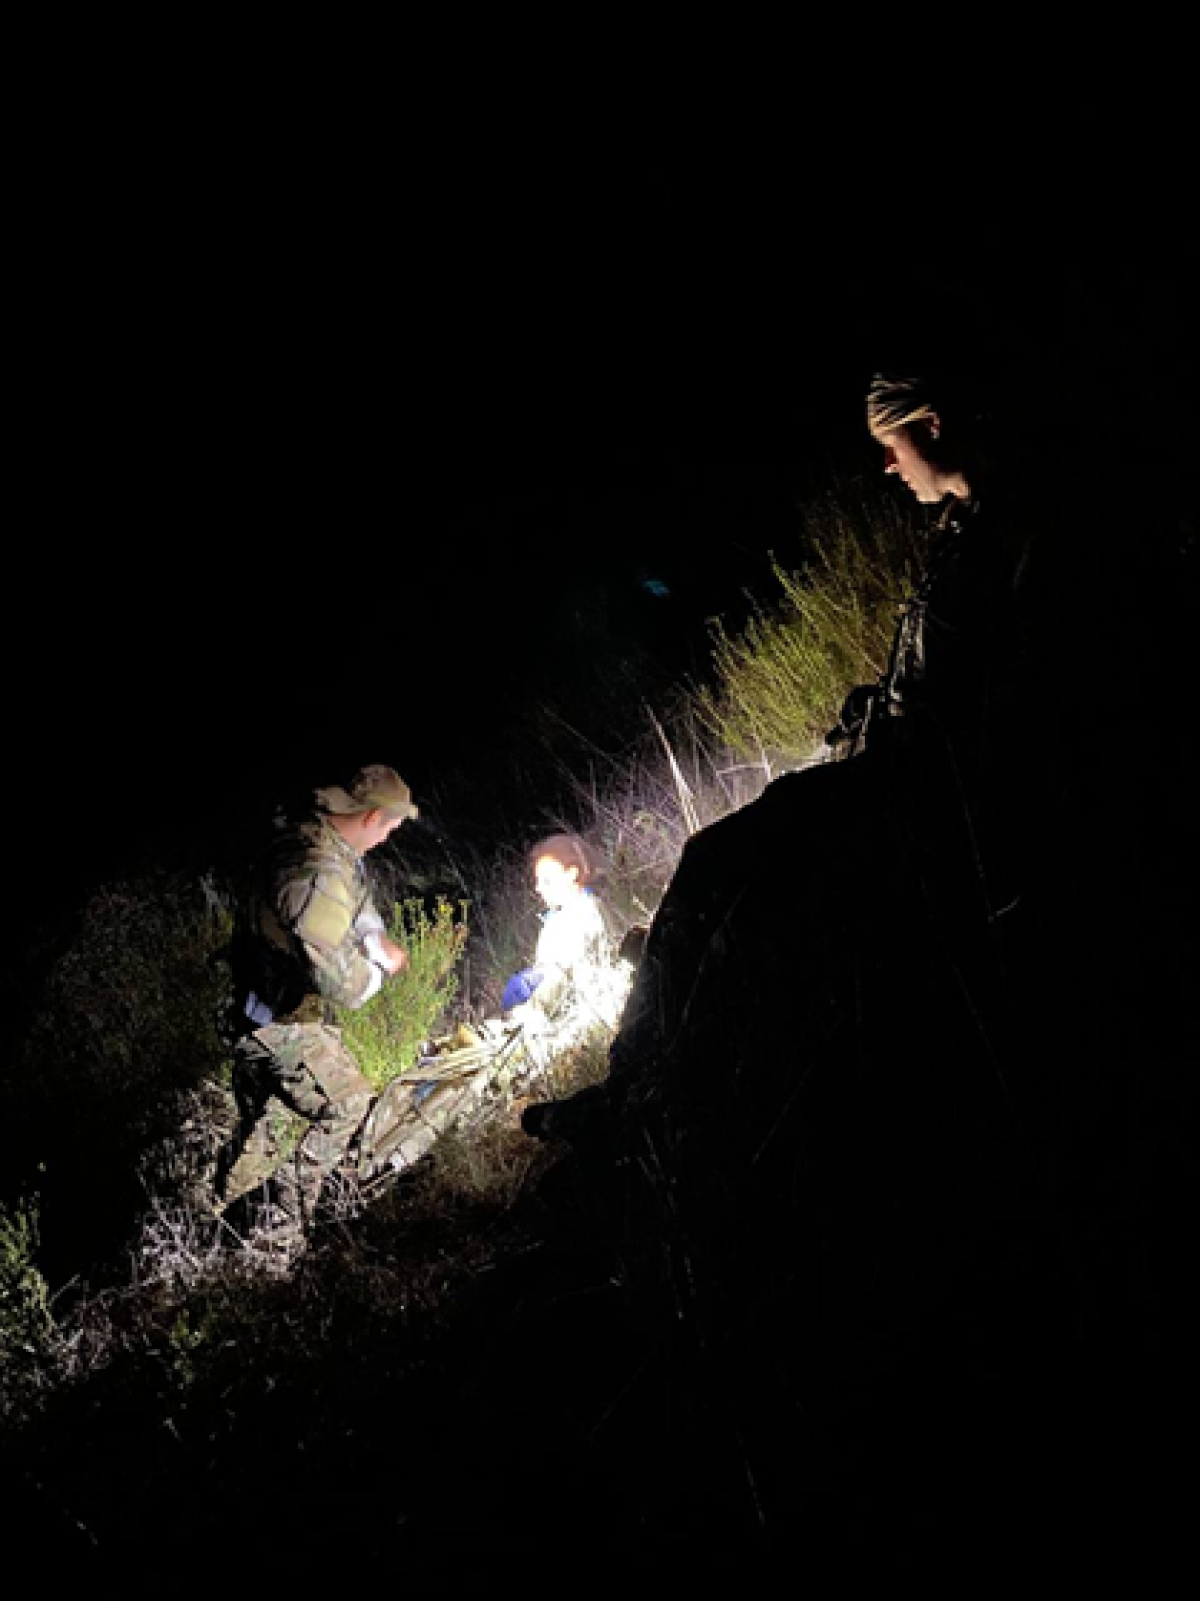 Border Patrol agents and Cal Fire firefighters rescued a woman who was lost and injured in the Otay Mountain area Sunday.